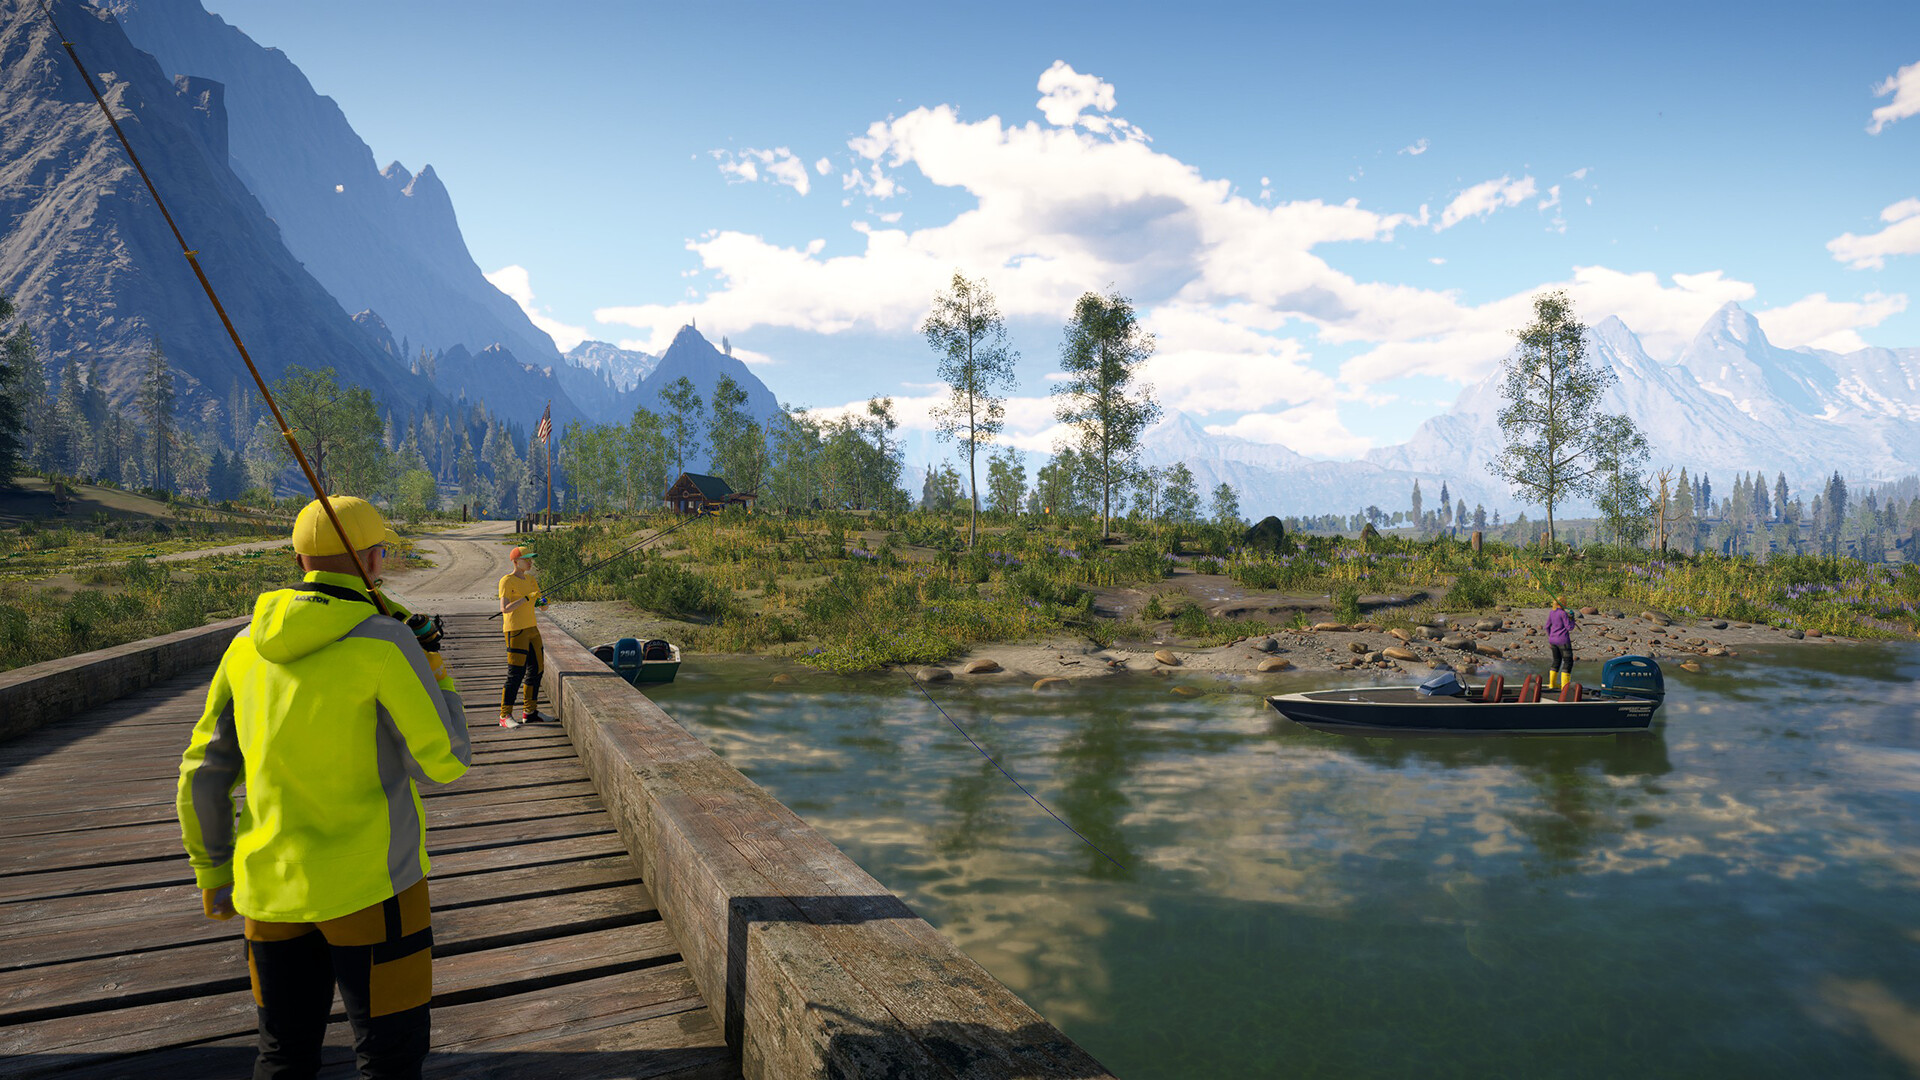 Call of the Wild: The Angler™ on Steam